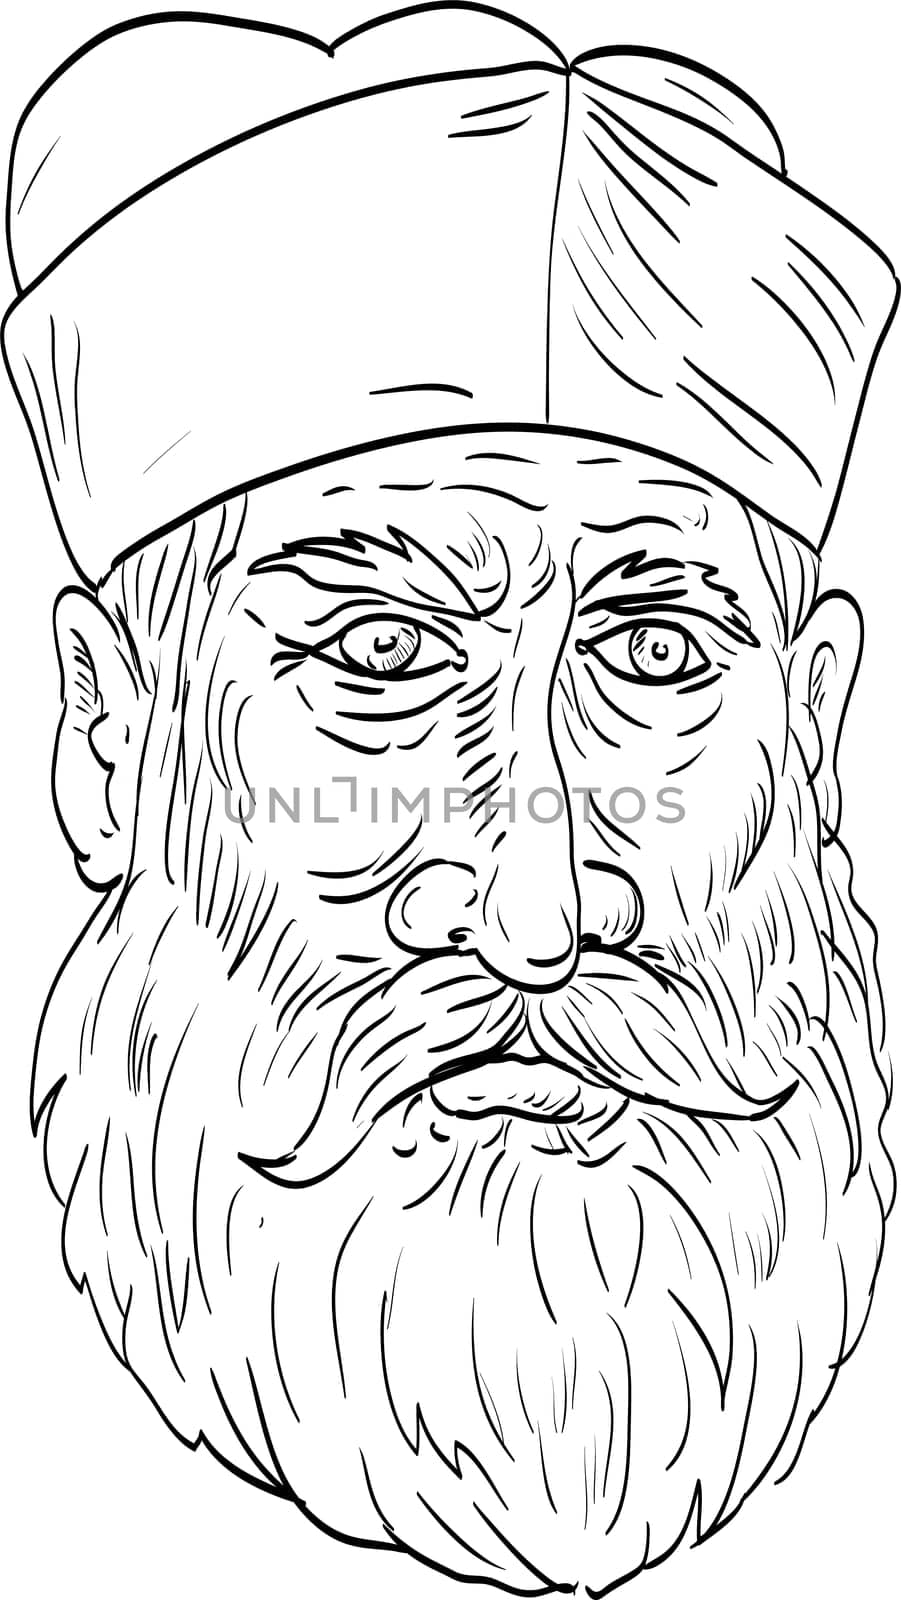 Line art drawing illustration of head of a roman catholic cardinal priest viewed from front done in medieval style on isolated background in black and white.